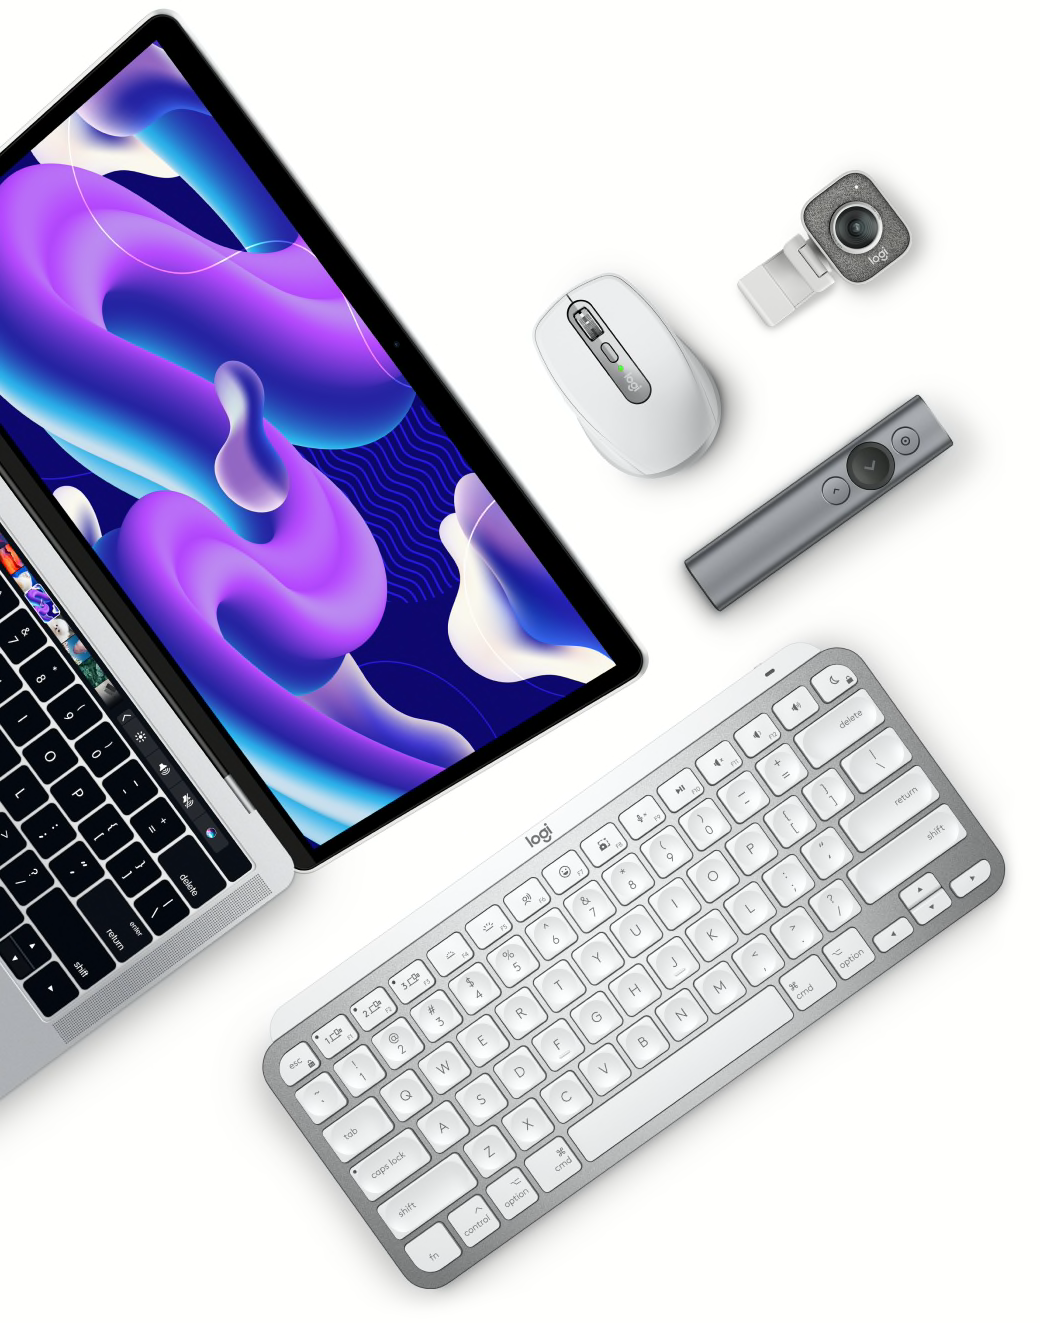 Apple Accessories for MacBook, iMac, iPad, iPhone, AirPods